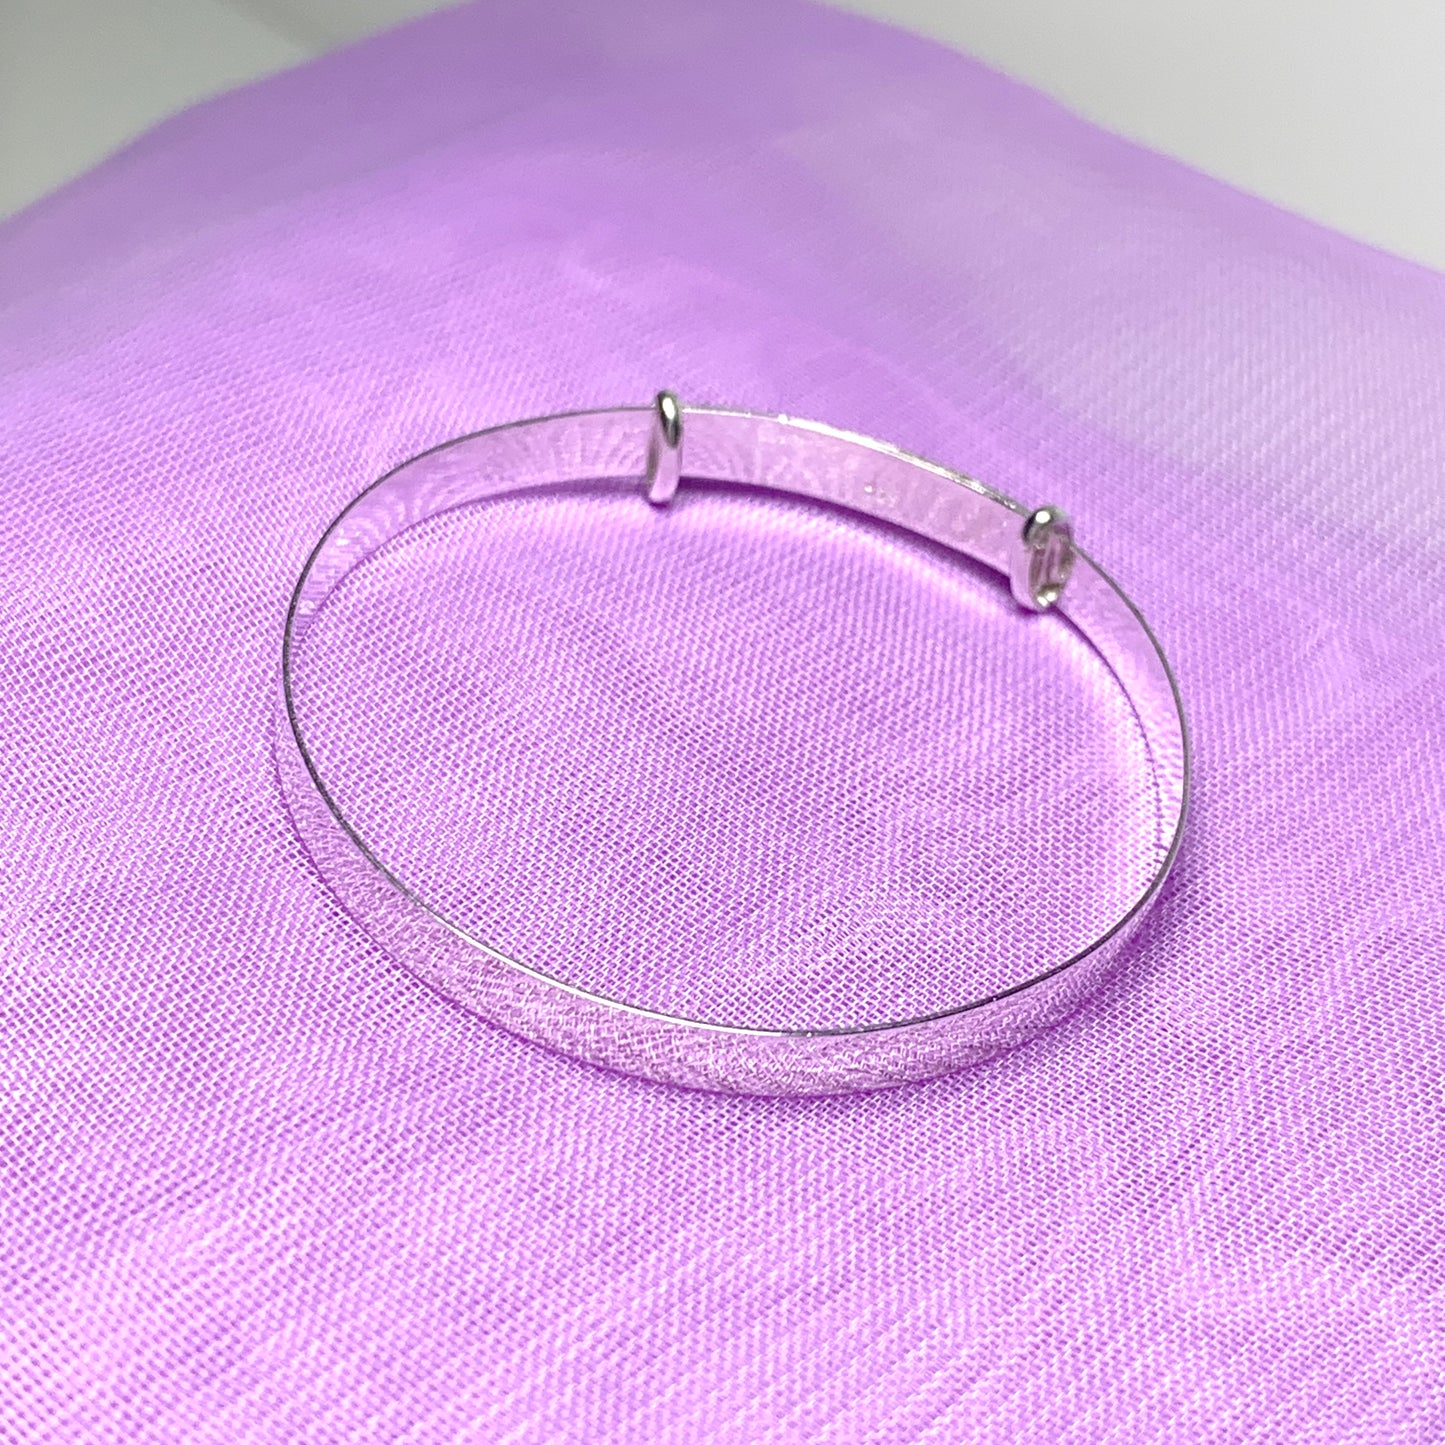 Child’s expanding bangle with a diamond cut design sterling silver